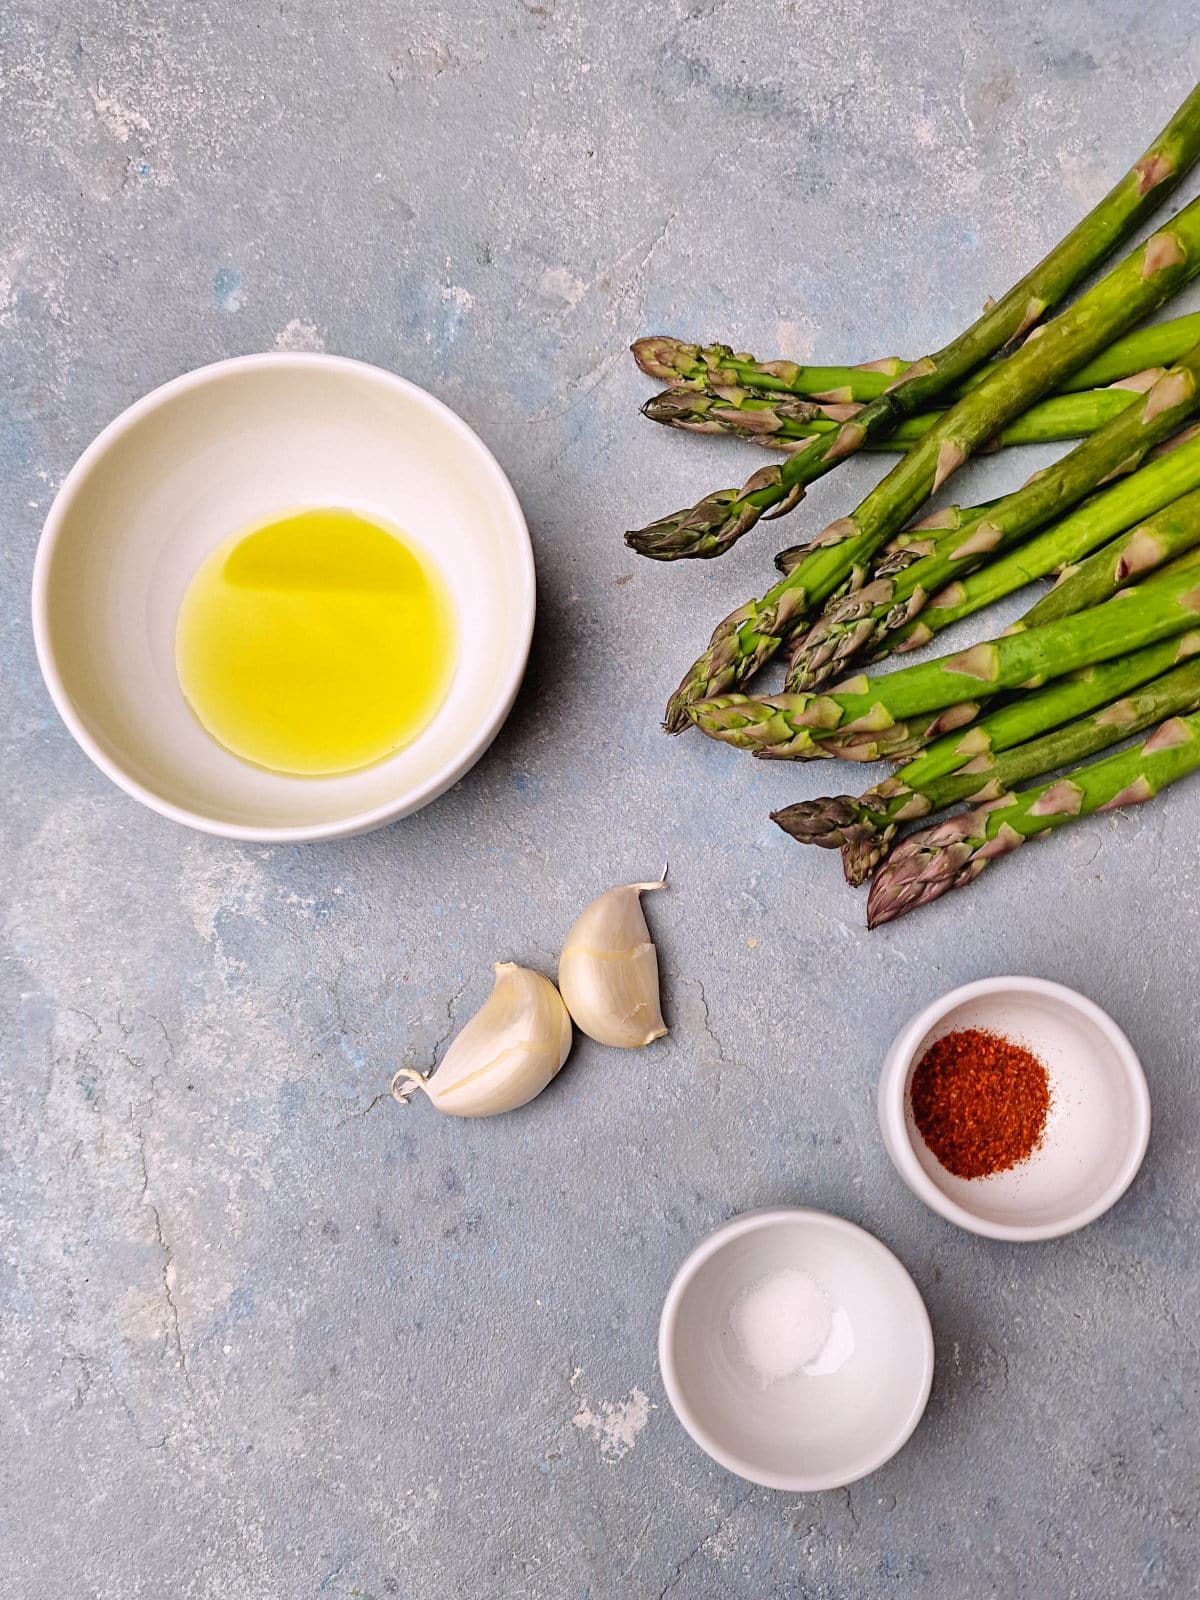 Asparagus, oil, garlic and spices in small bowls on surface. 